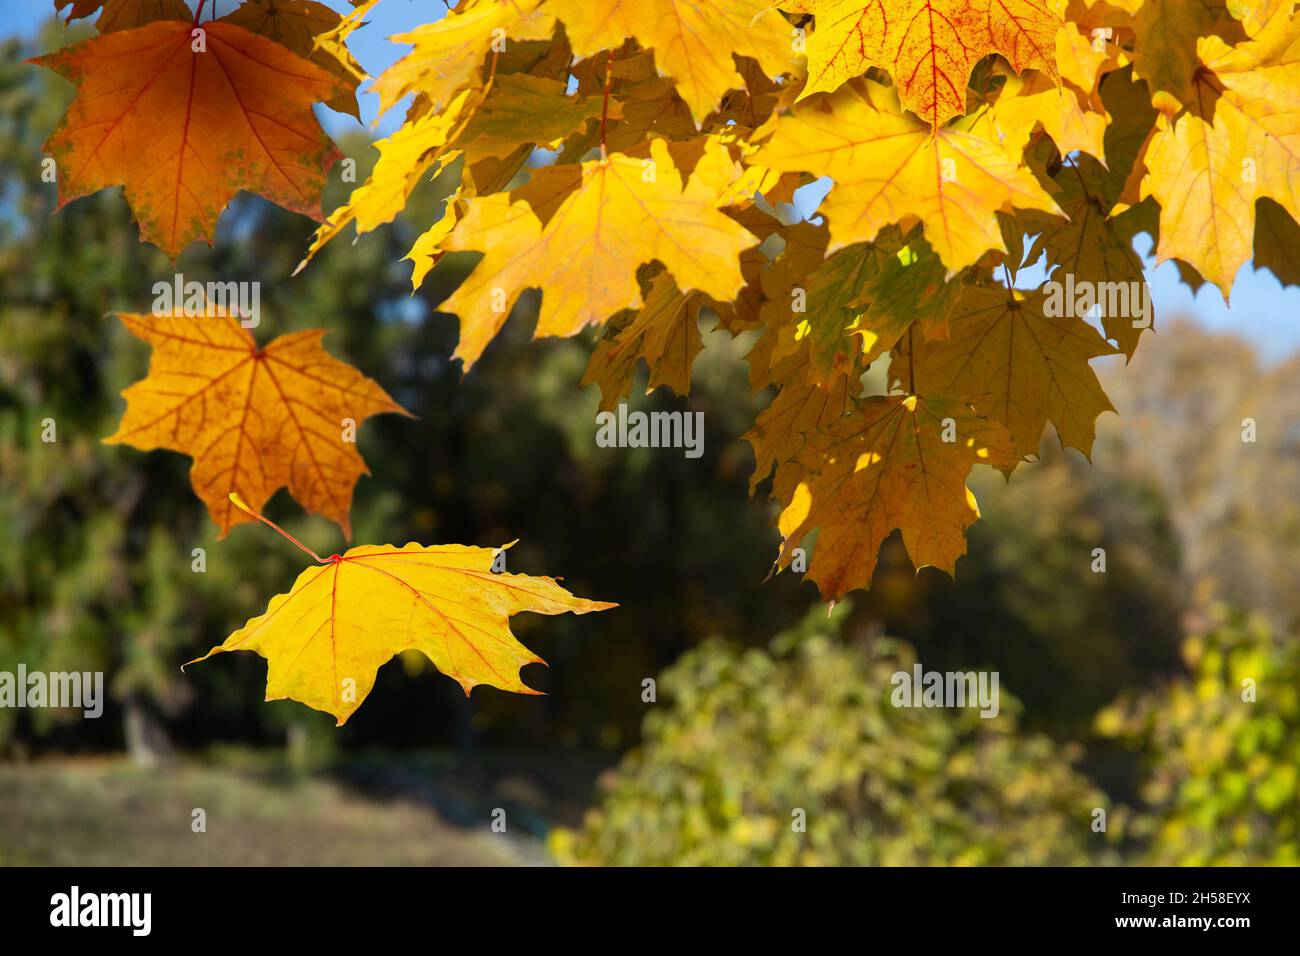 falling autumn yelow leafs on blured forest natural background Stock Photo